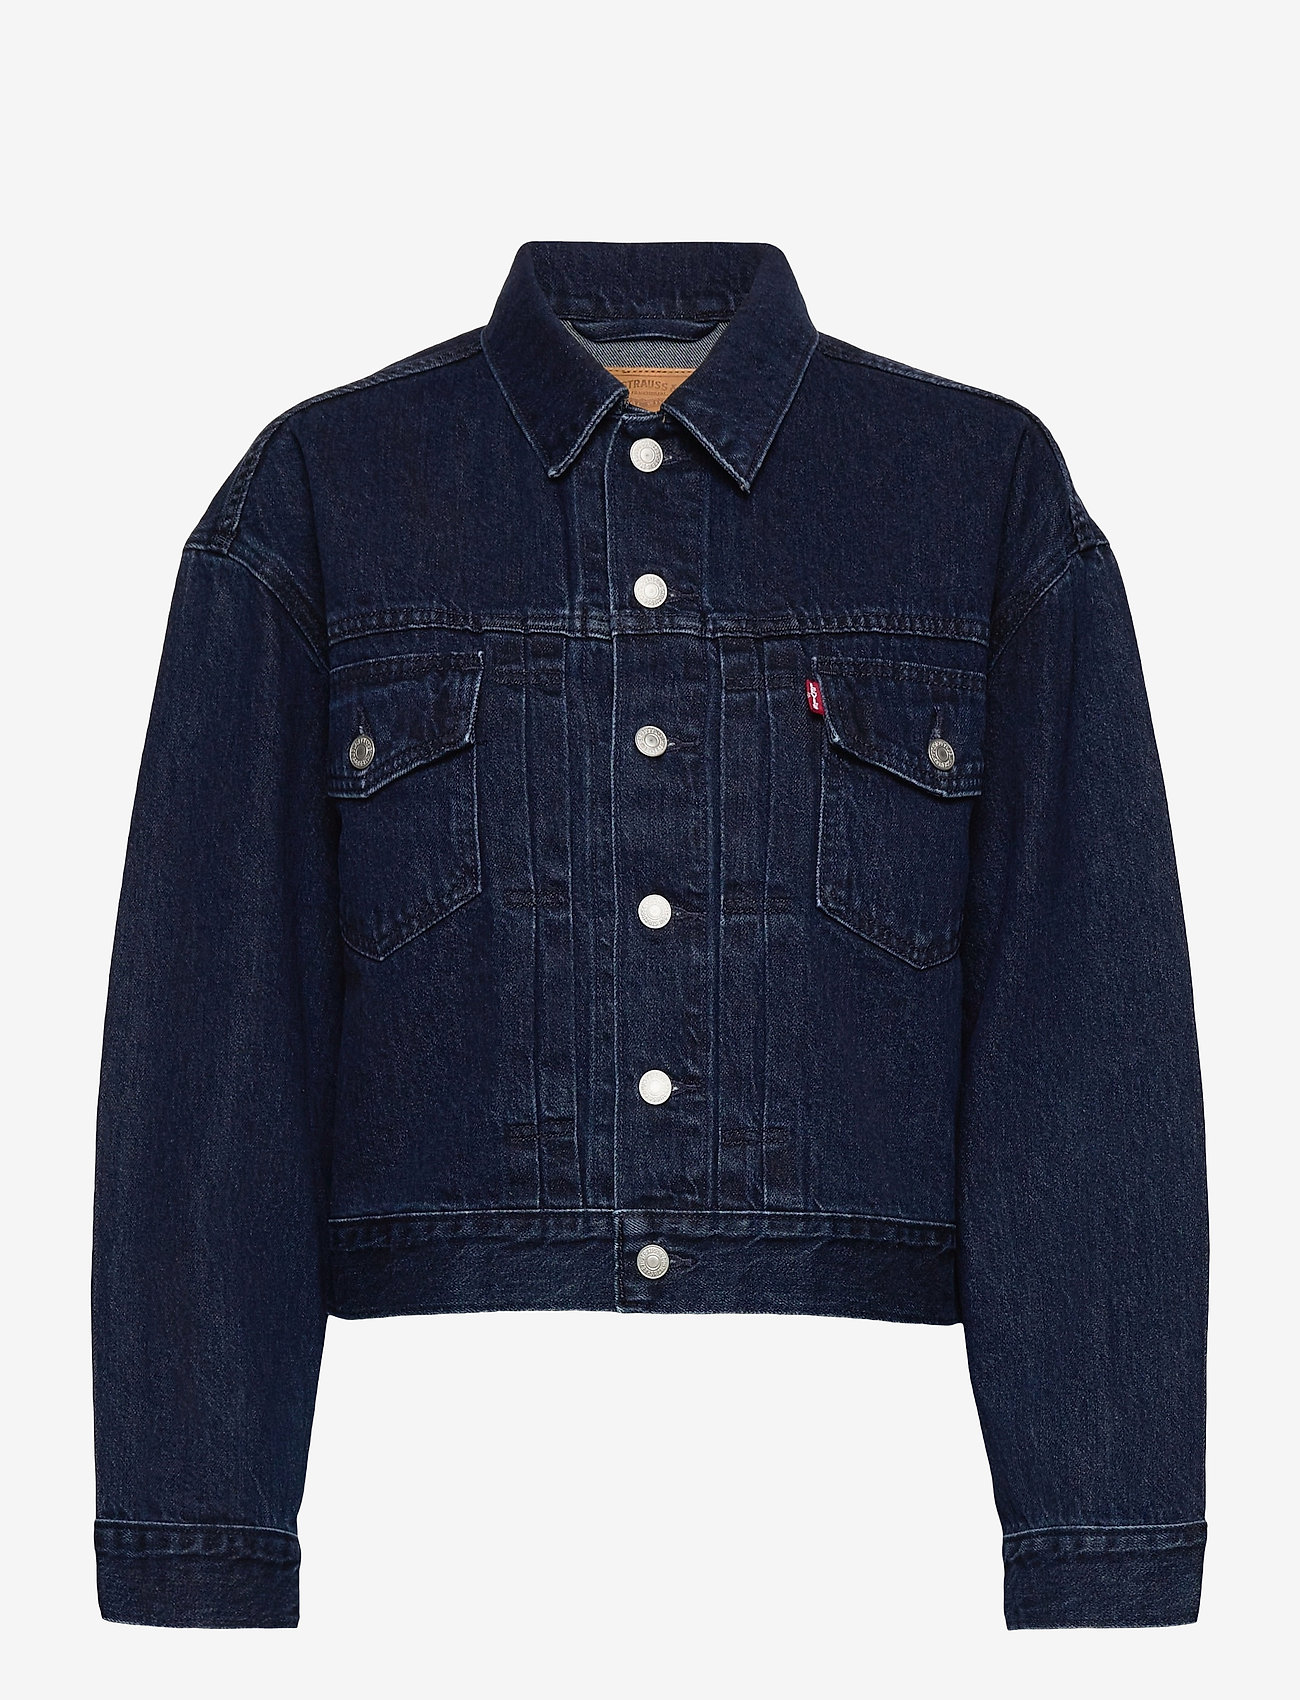 Levis New Heritage Clearance, SAVE 39% 